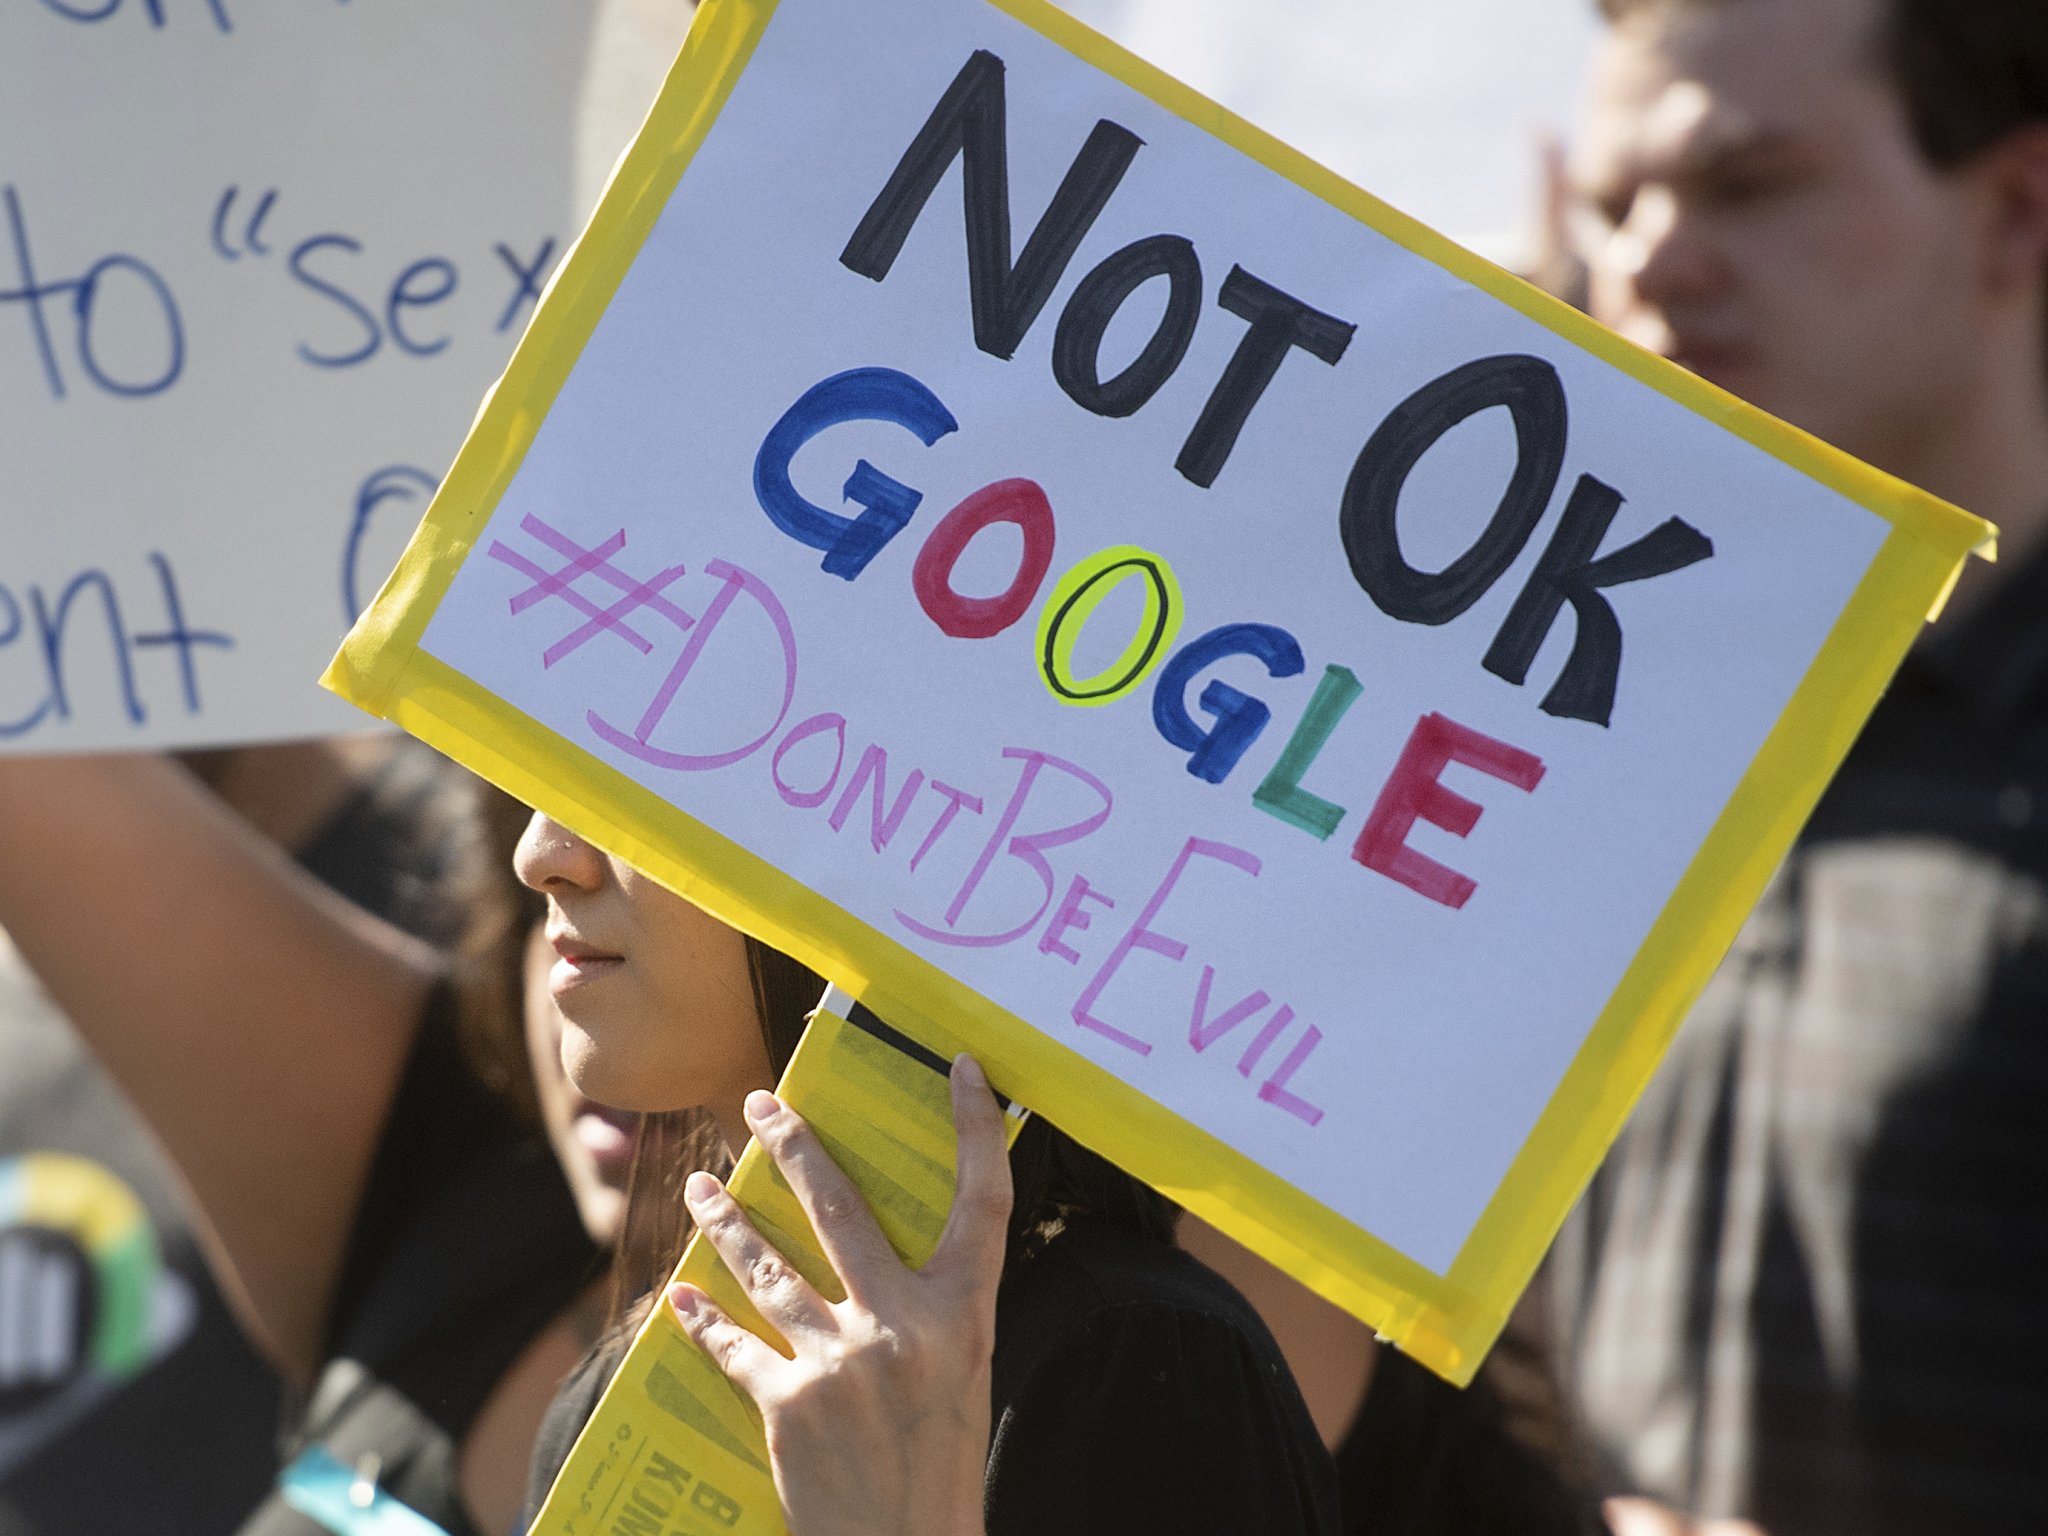 Google Illegally Fired And Spied On Workers Who Tried To Organize, Labor Agency Says